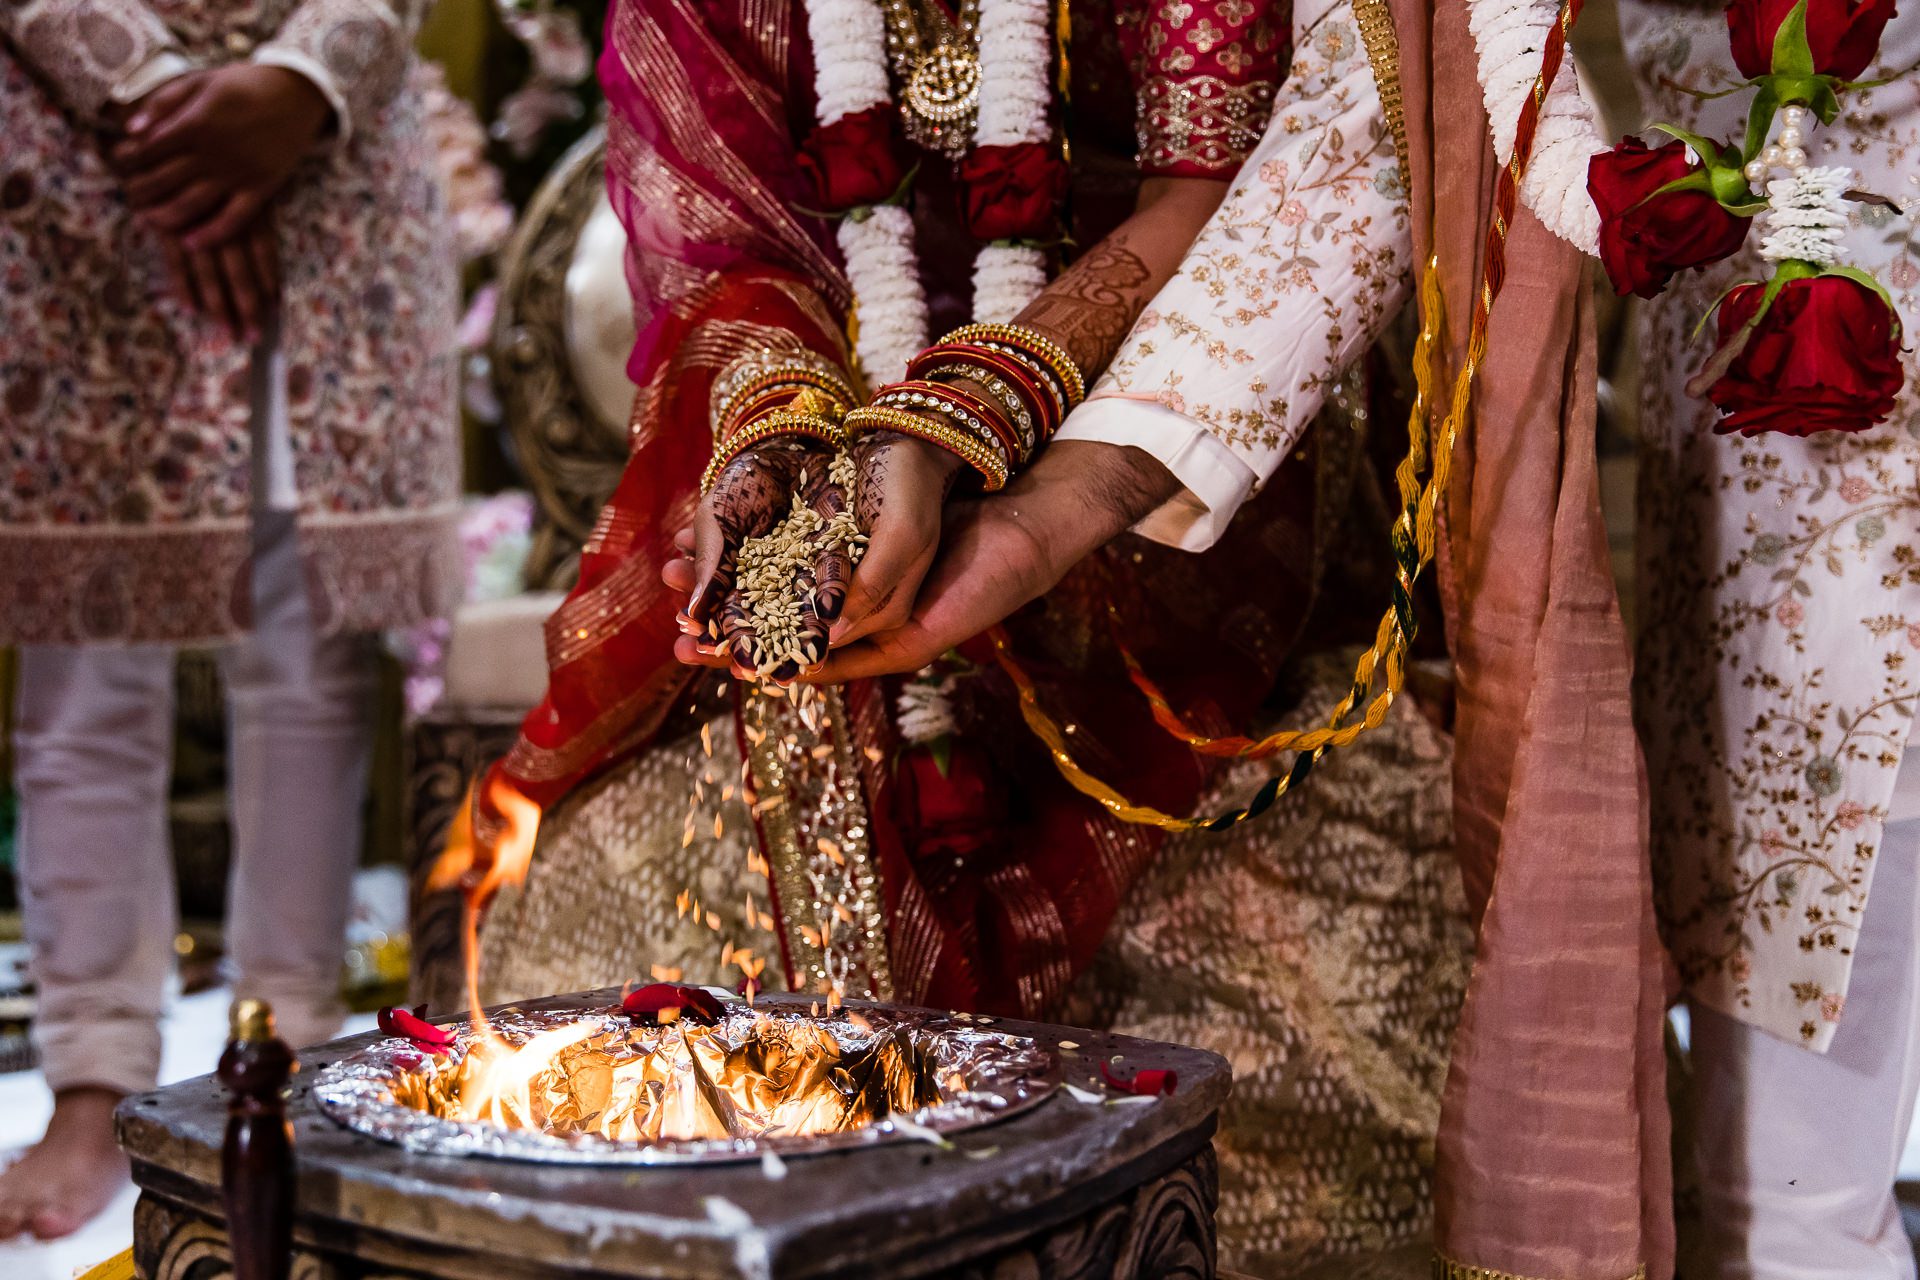 Seeds being offered into the fire during Asian wedding